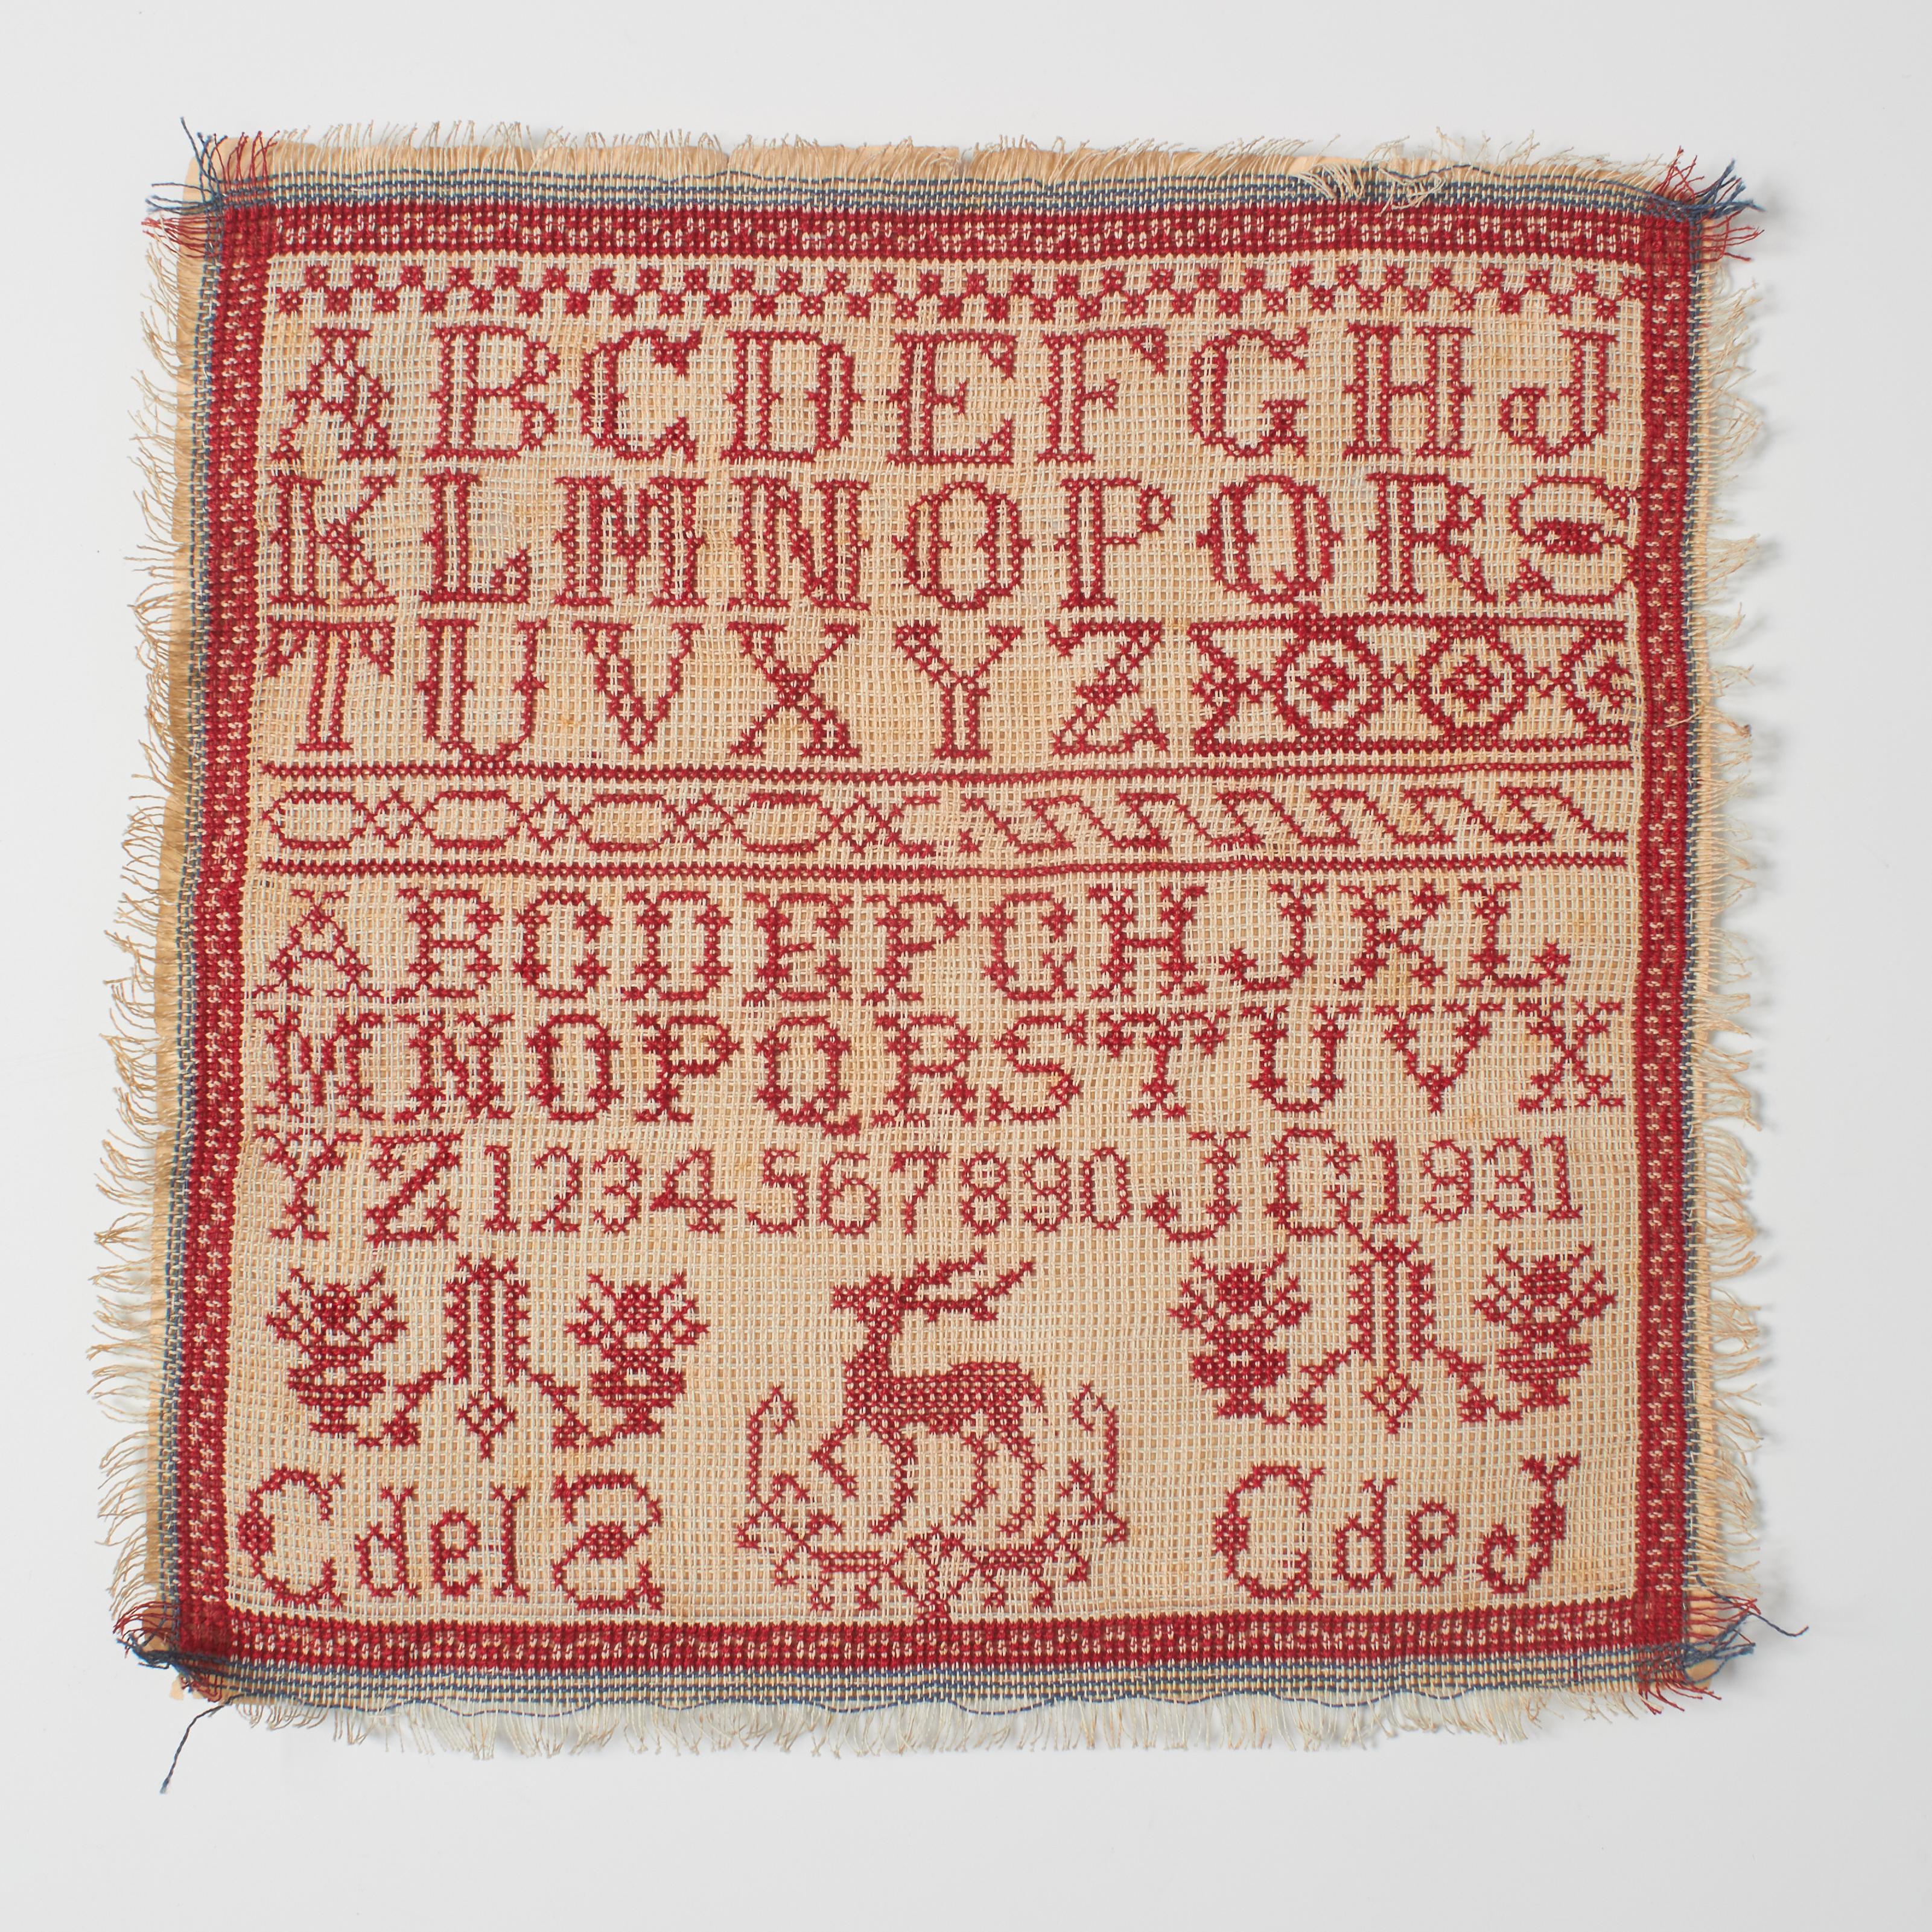 Dive into the timeless allure of our vintage cross-stitch sampler from the early 20th century. This unique piece showcases a classic red-on-white design featuring meticulously crafted letters of the alphabet, numbers, and a graceful border that adds